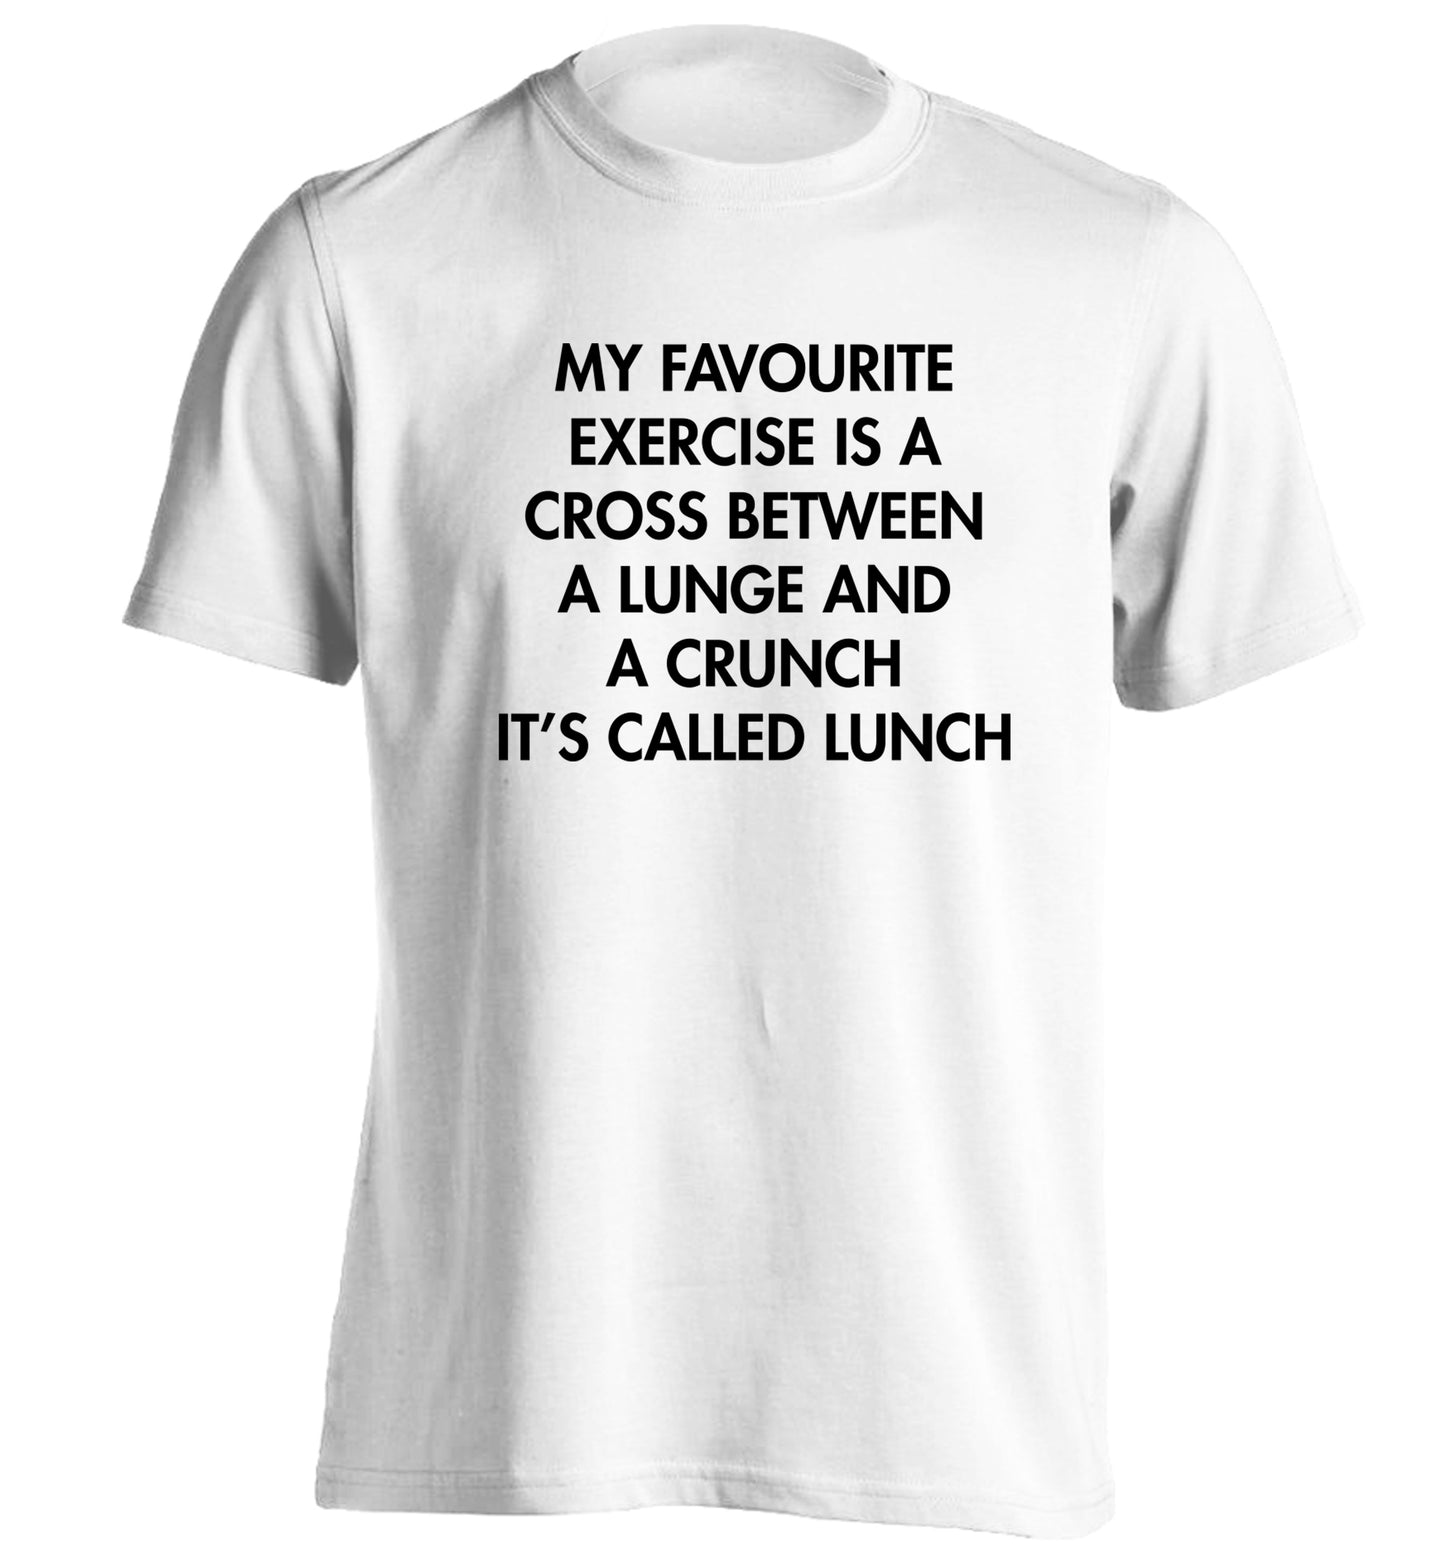 My favourite exercise is a cross between a lung and a crunch it's called lunch adults unisex white Tshirt 2XL